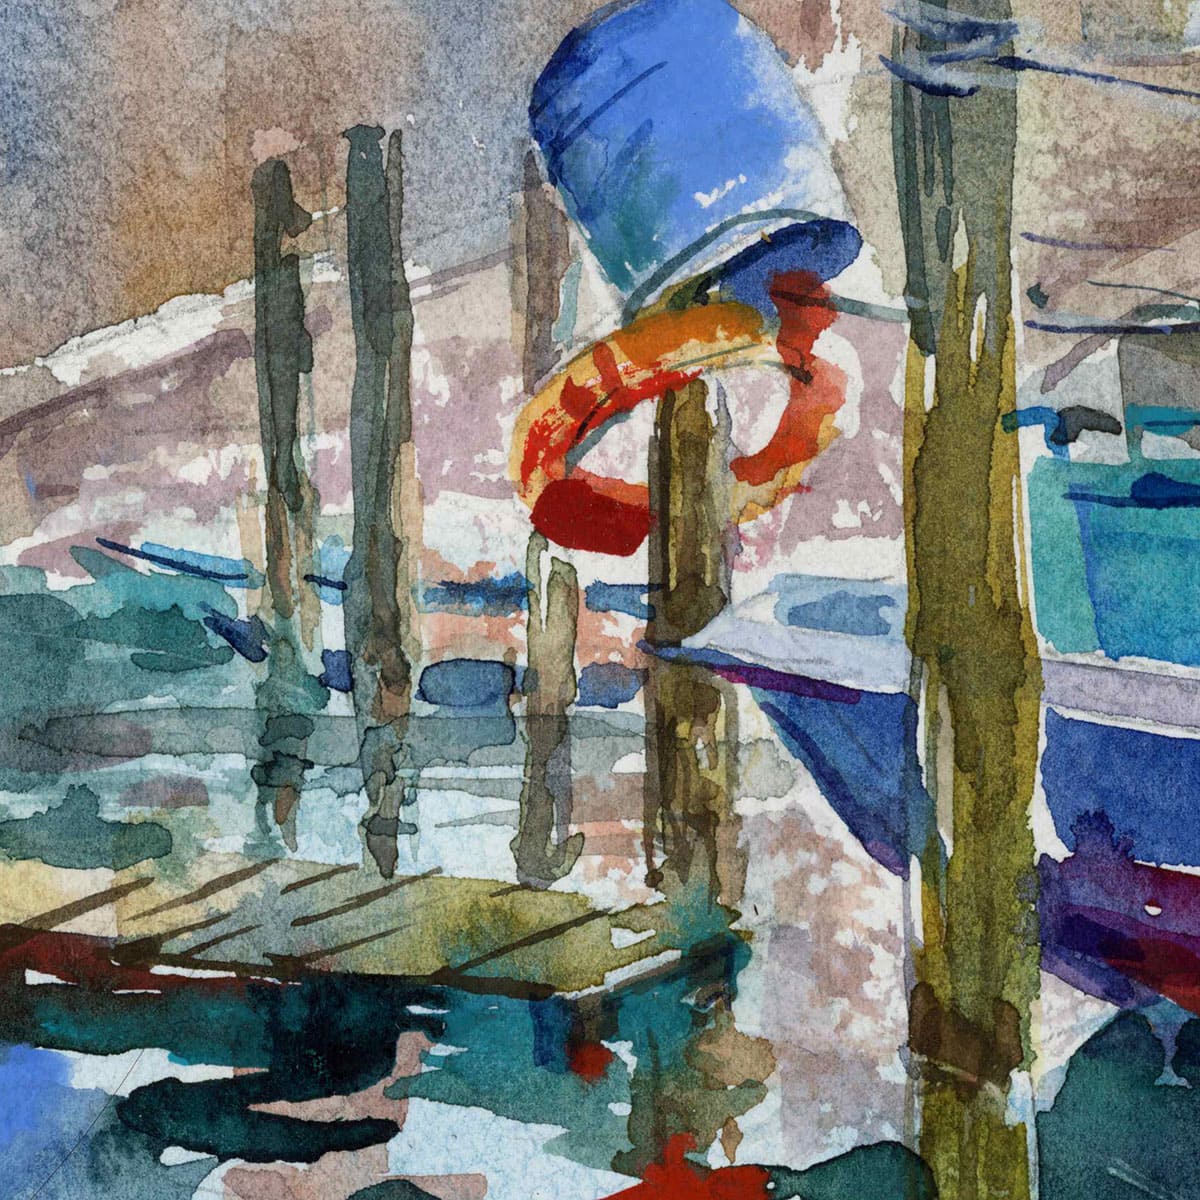 Fishing boats in Chioggia. Fragment of Watercolor sketch